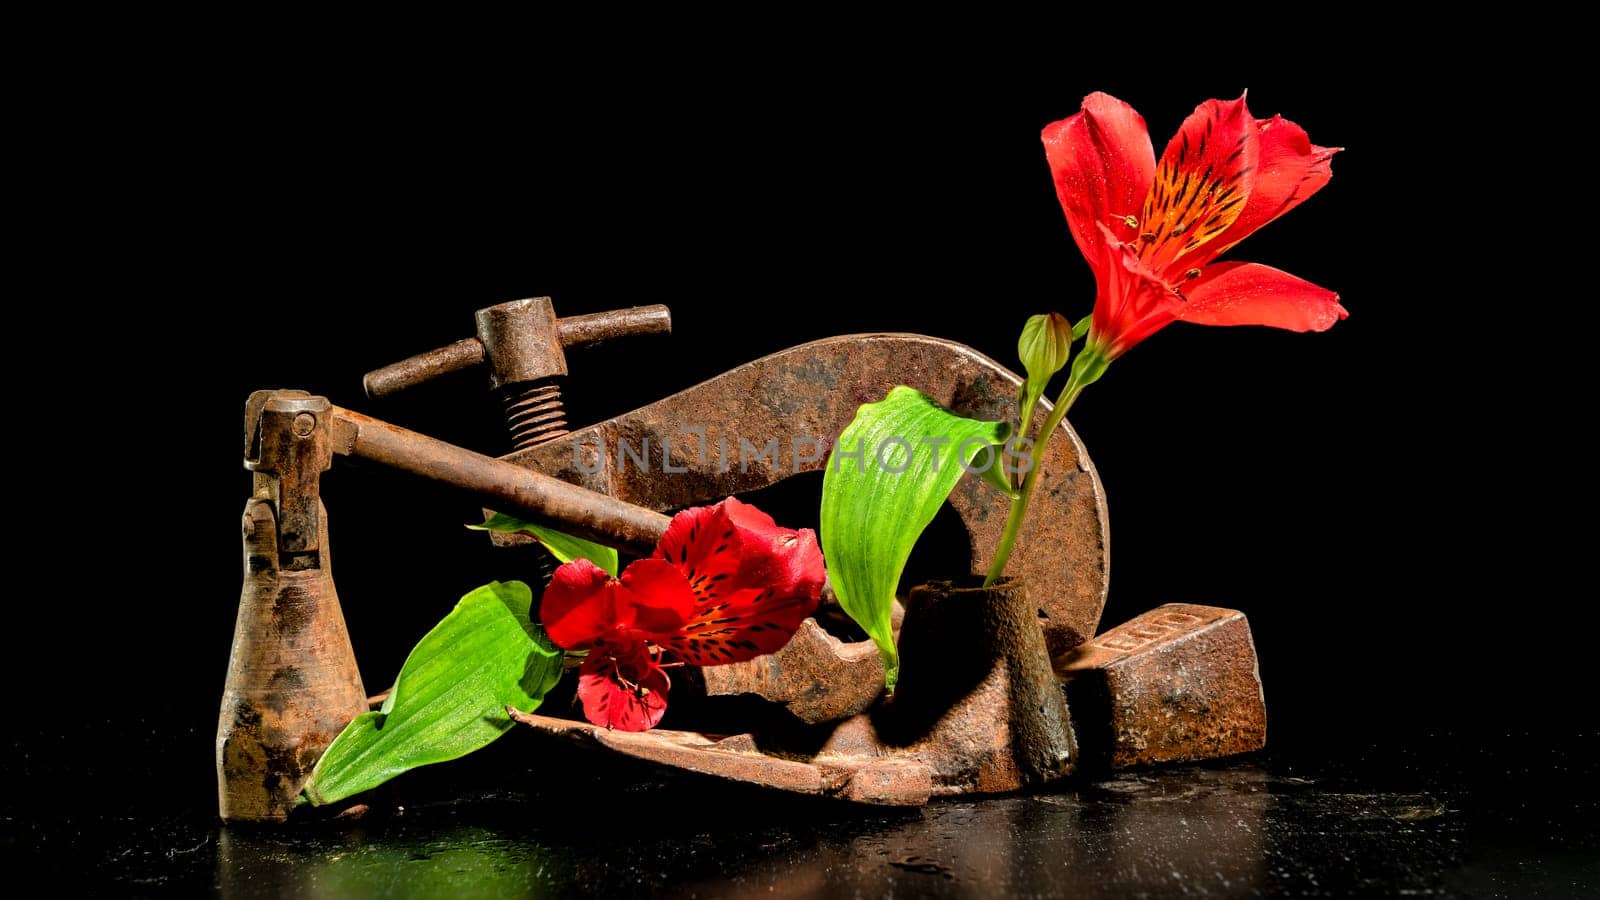 Creative still life with old rusty metal tool and red Alstroemeria flower on a black background